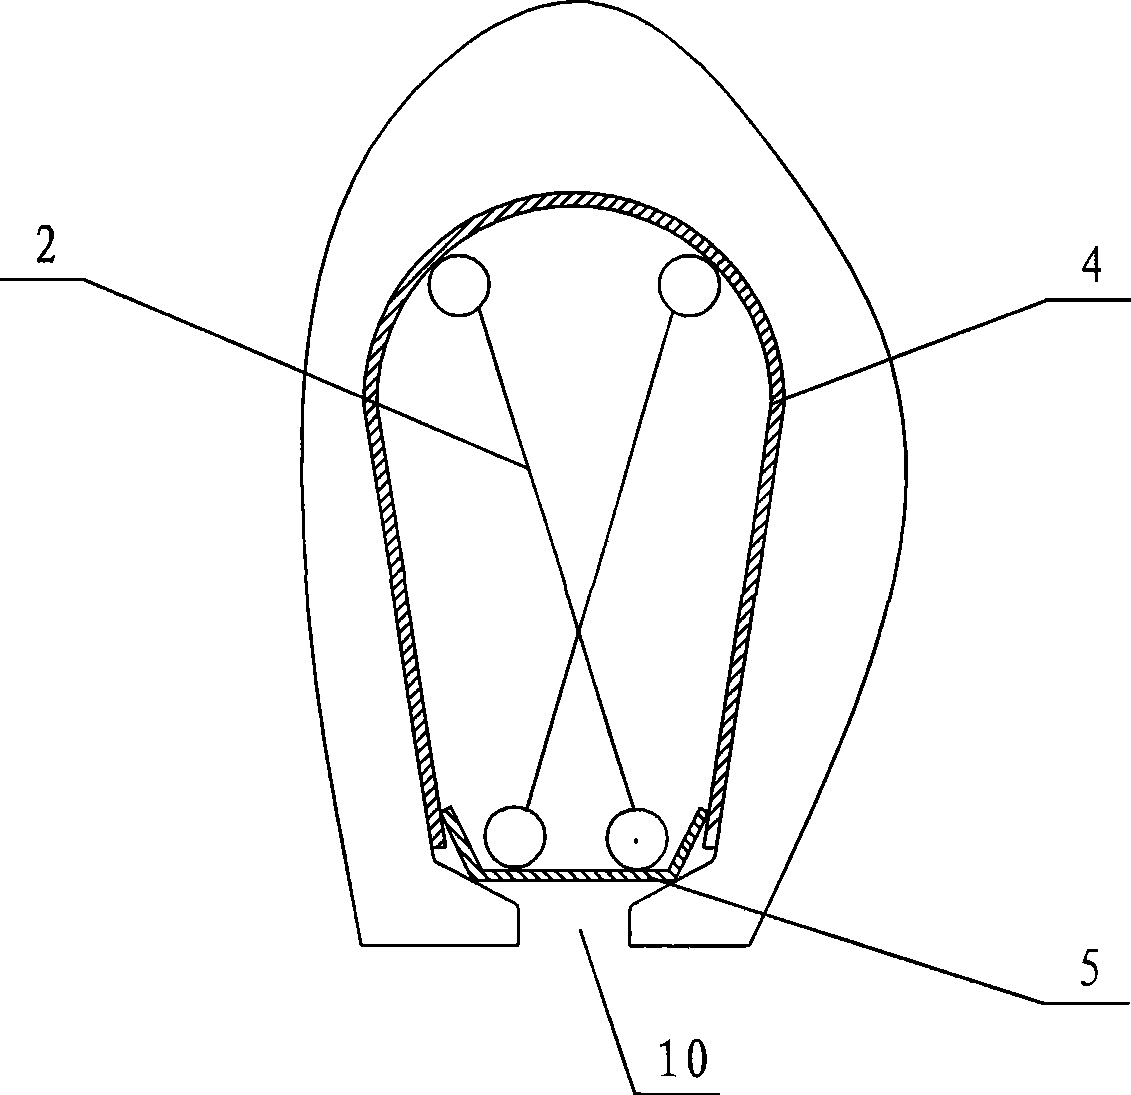 Device for preventing motor stator slot wedge from moving